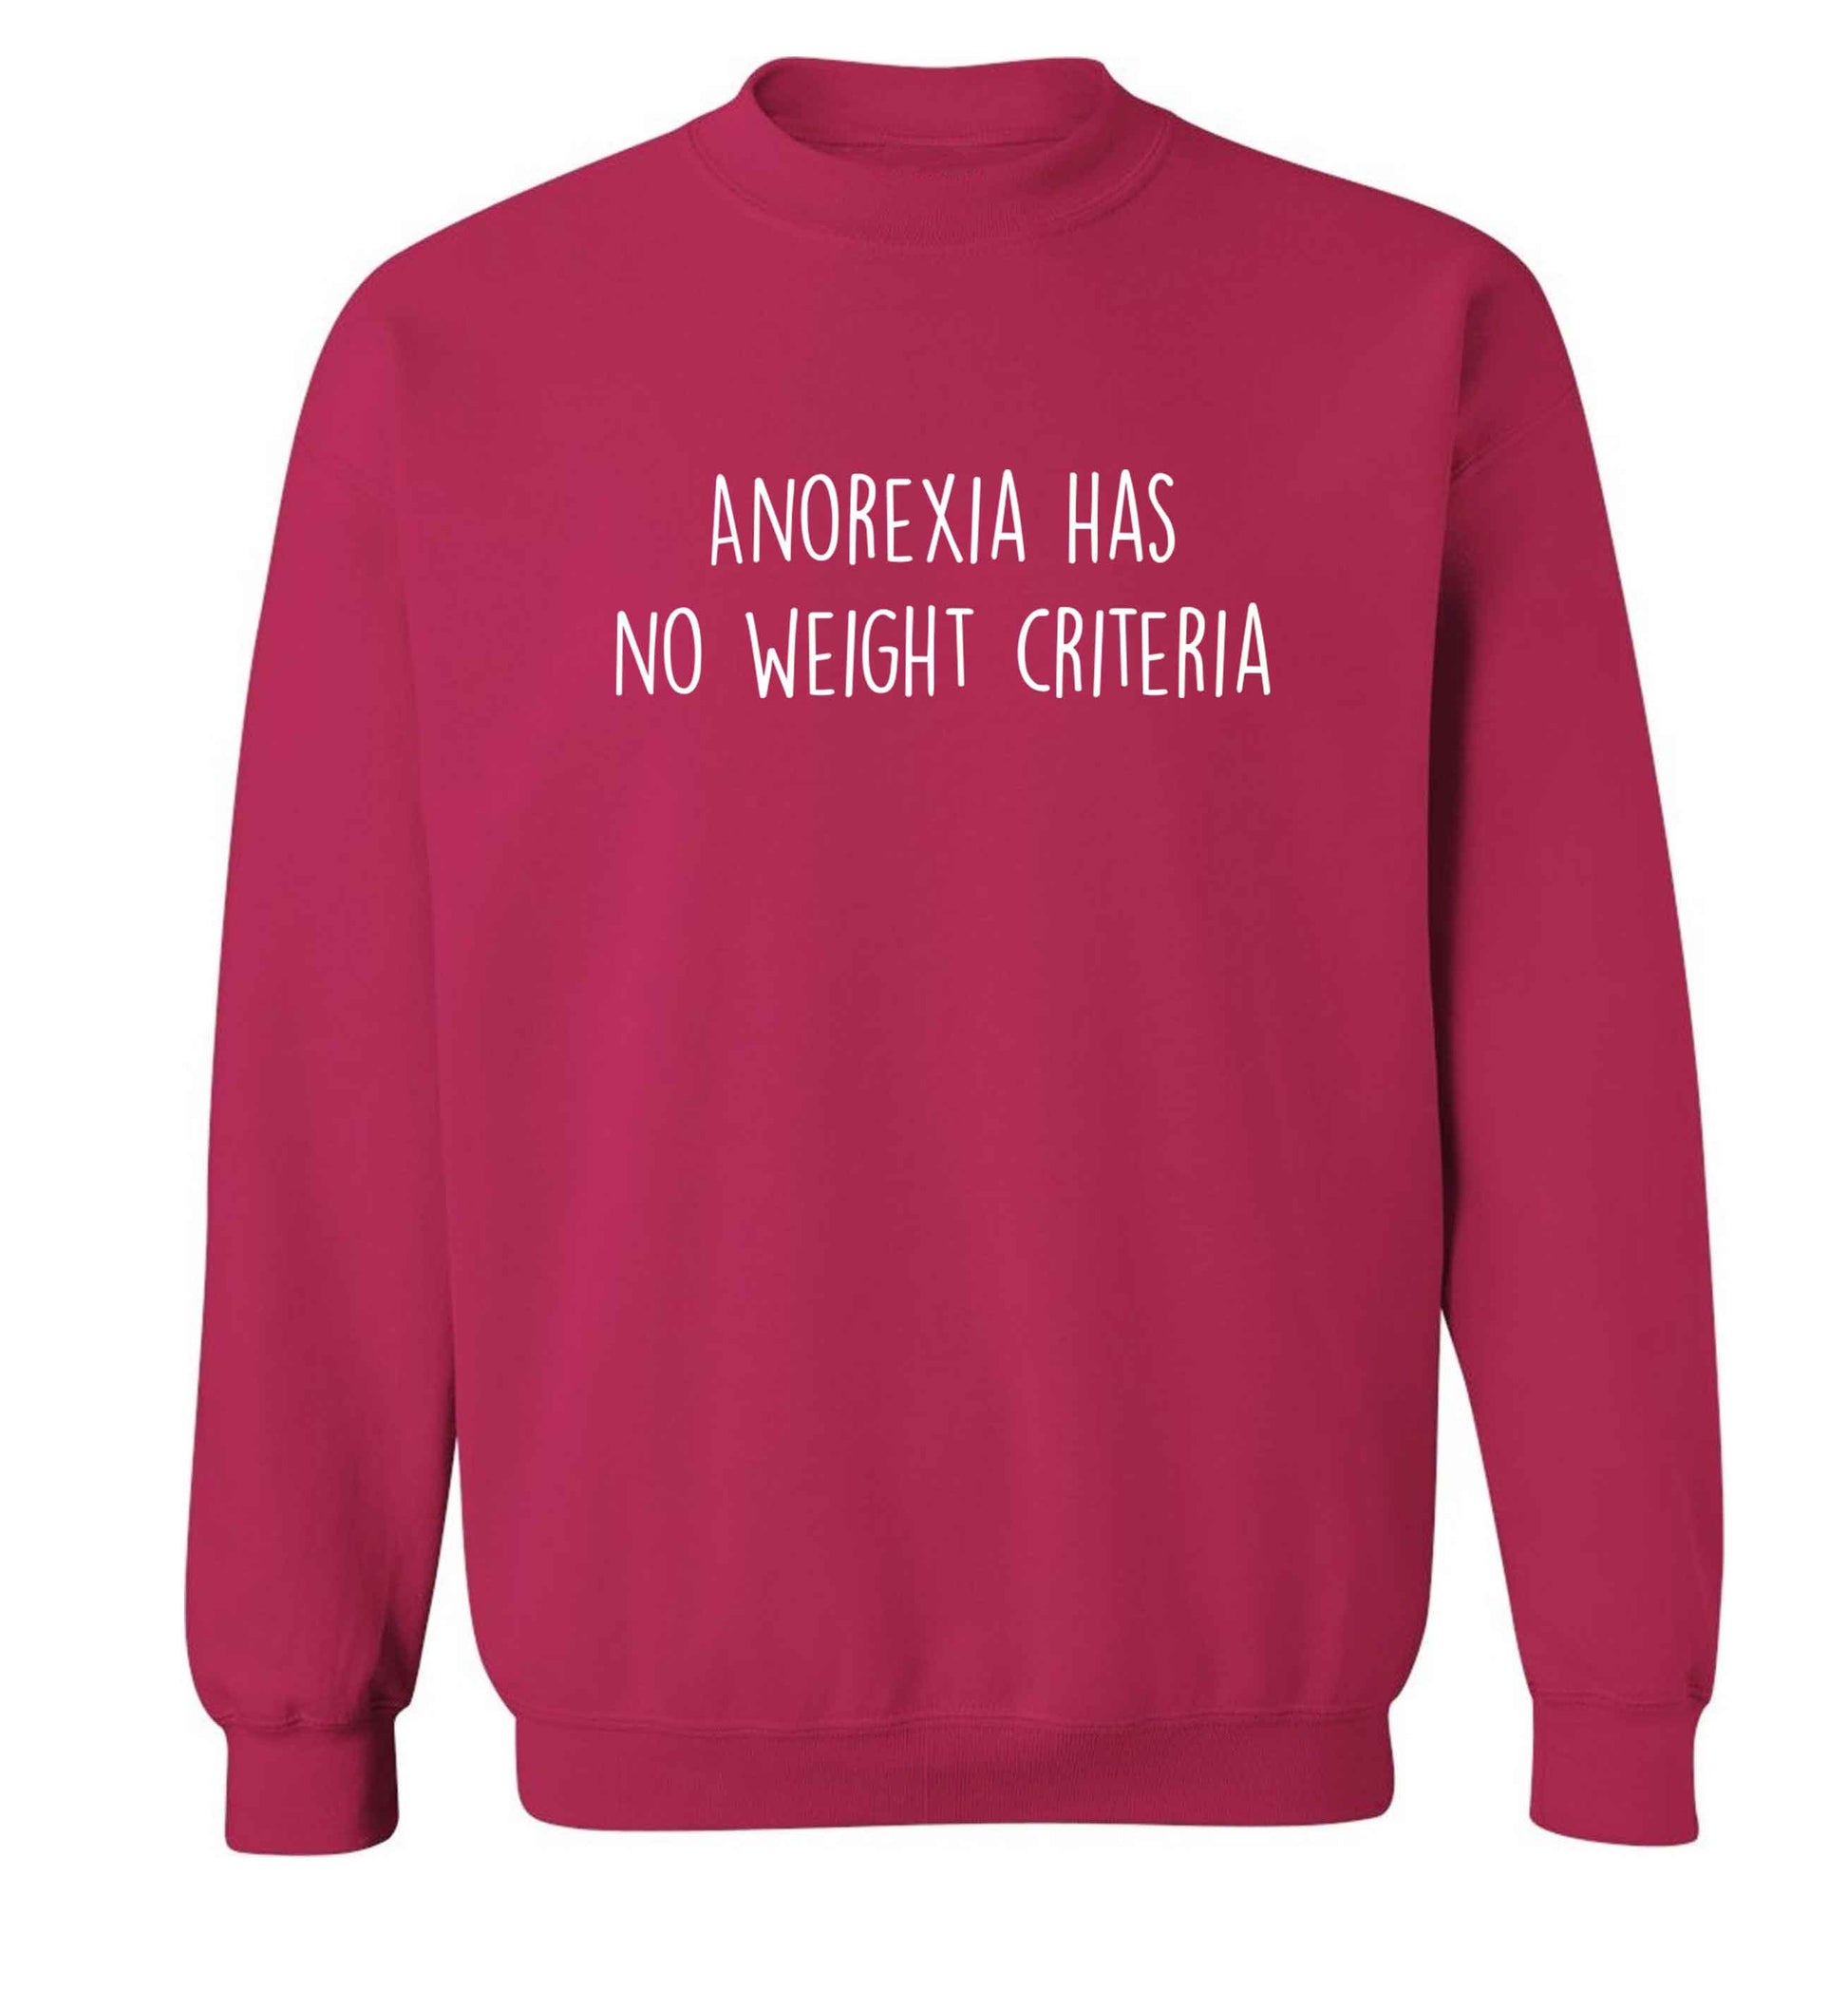 Anorexia has no weight criteria adult's unisex pink sweater 2XL